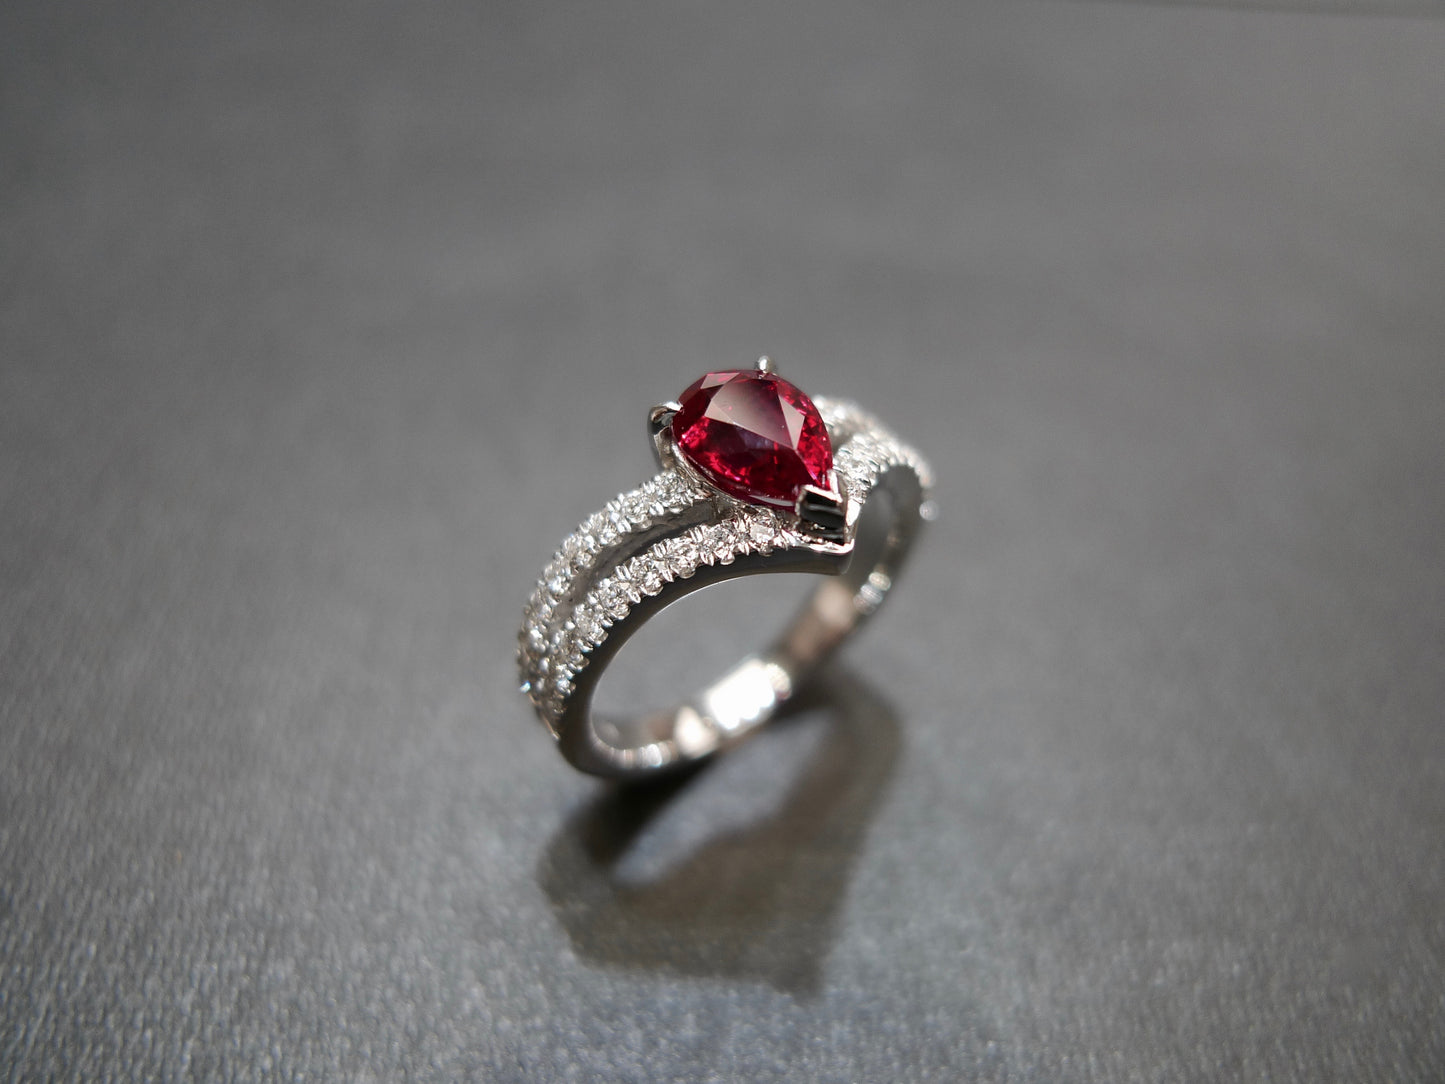 Pear Shaped Ruby and Diamond Ring in 18K White Gold - HN JEWELRY